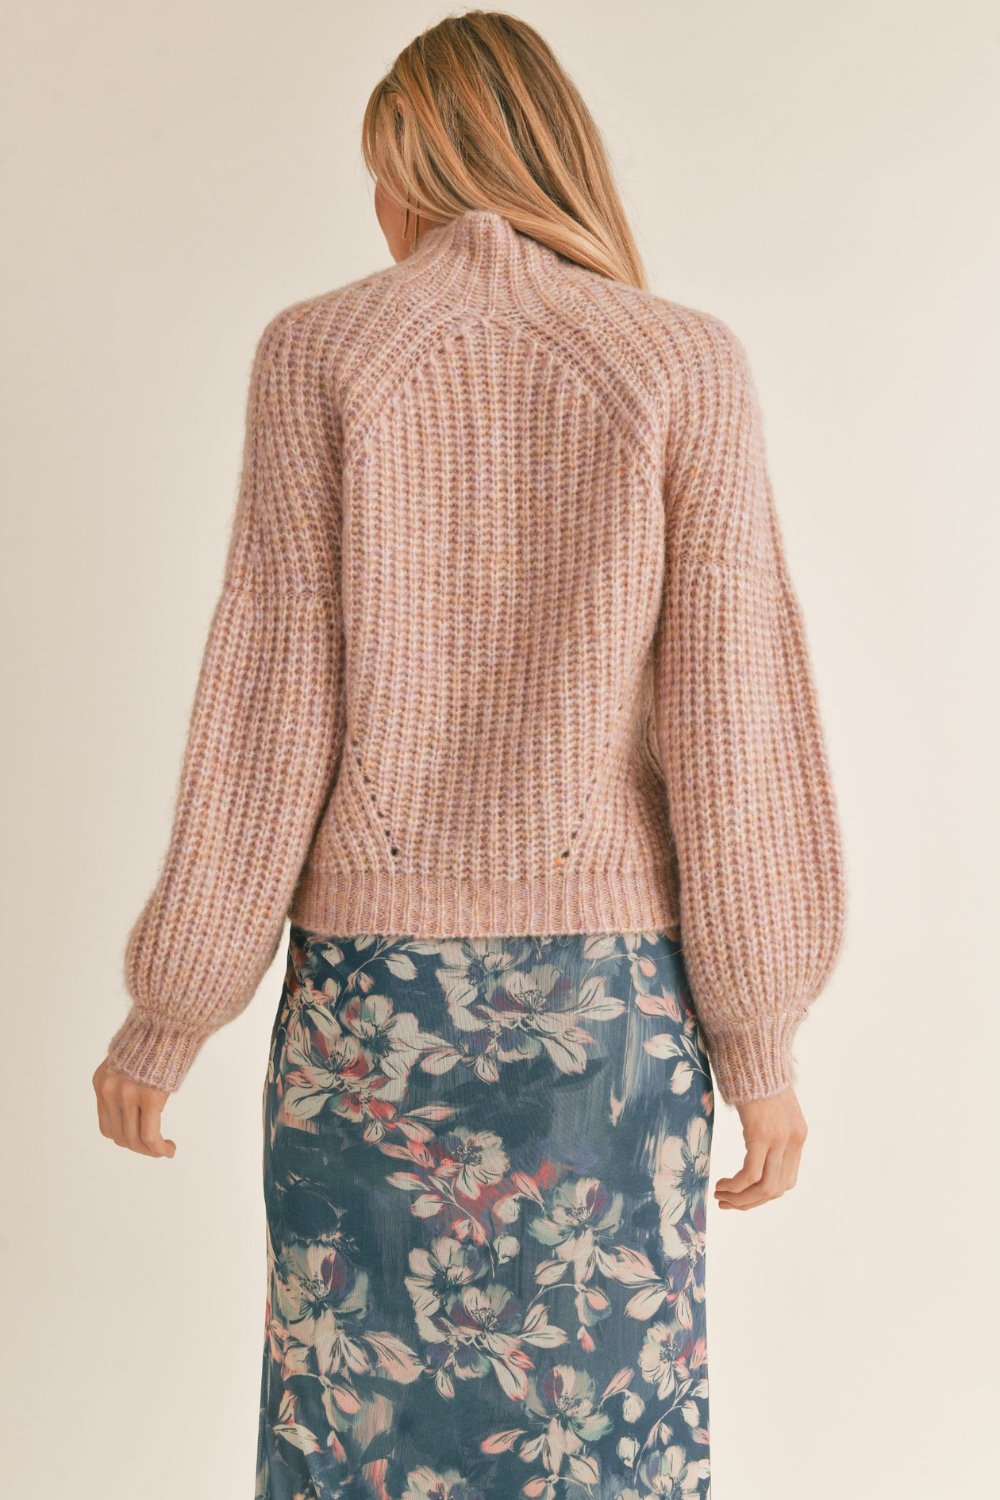 Women's Wool Blend Mock Neck Knit Sweater Top | Dusty pink - Women's Shirts & Tops - Blooming Daily